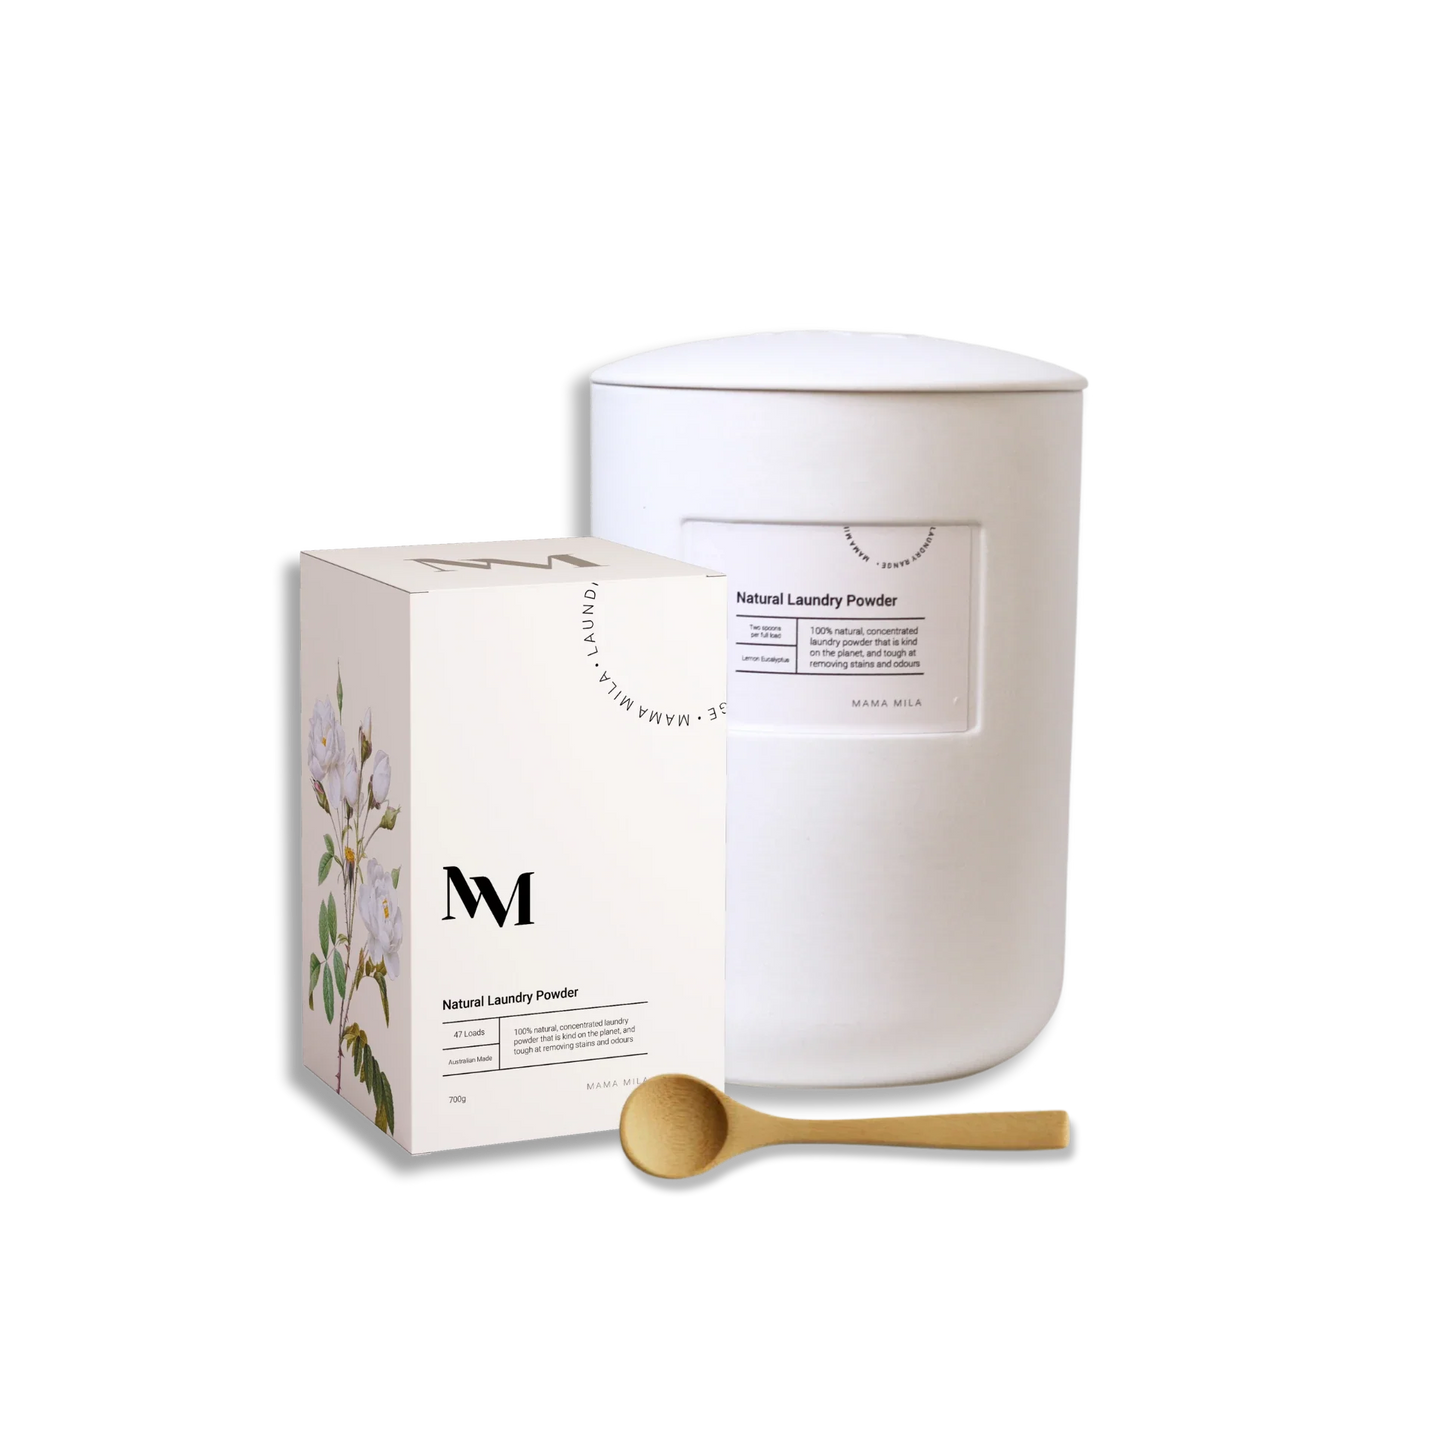 Photo of Natural Laundry Powder with one white jar and wooden spoon